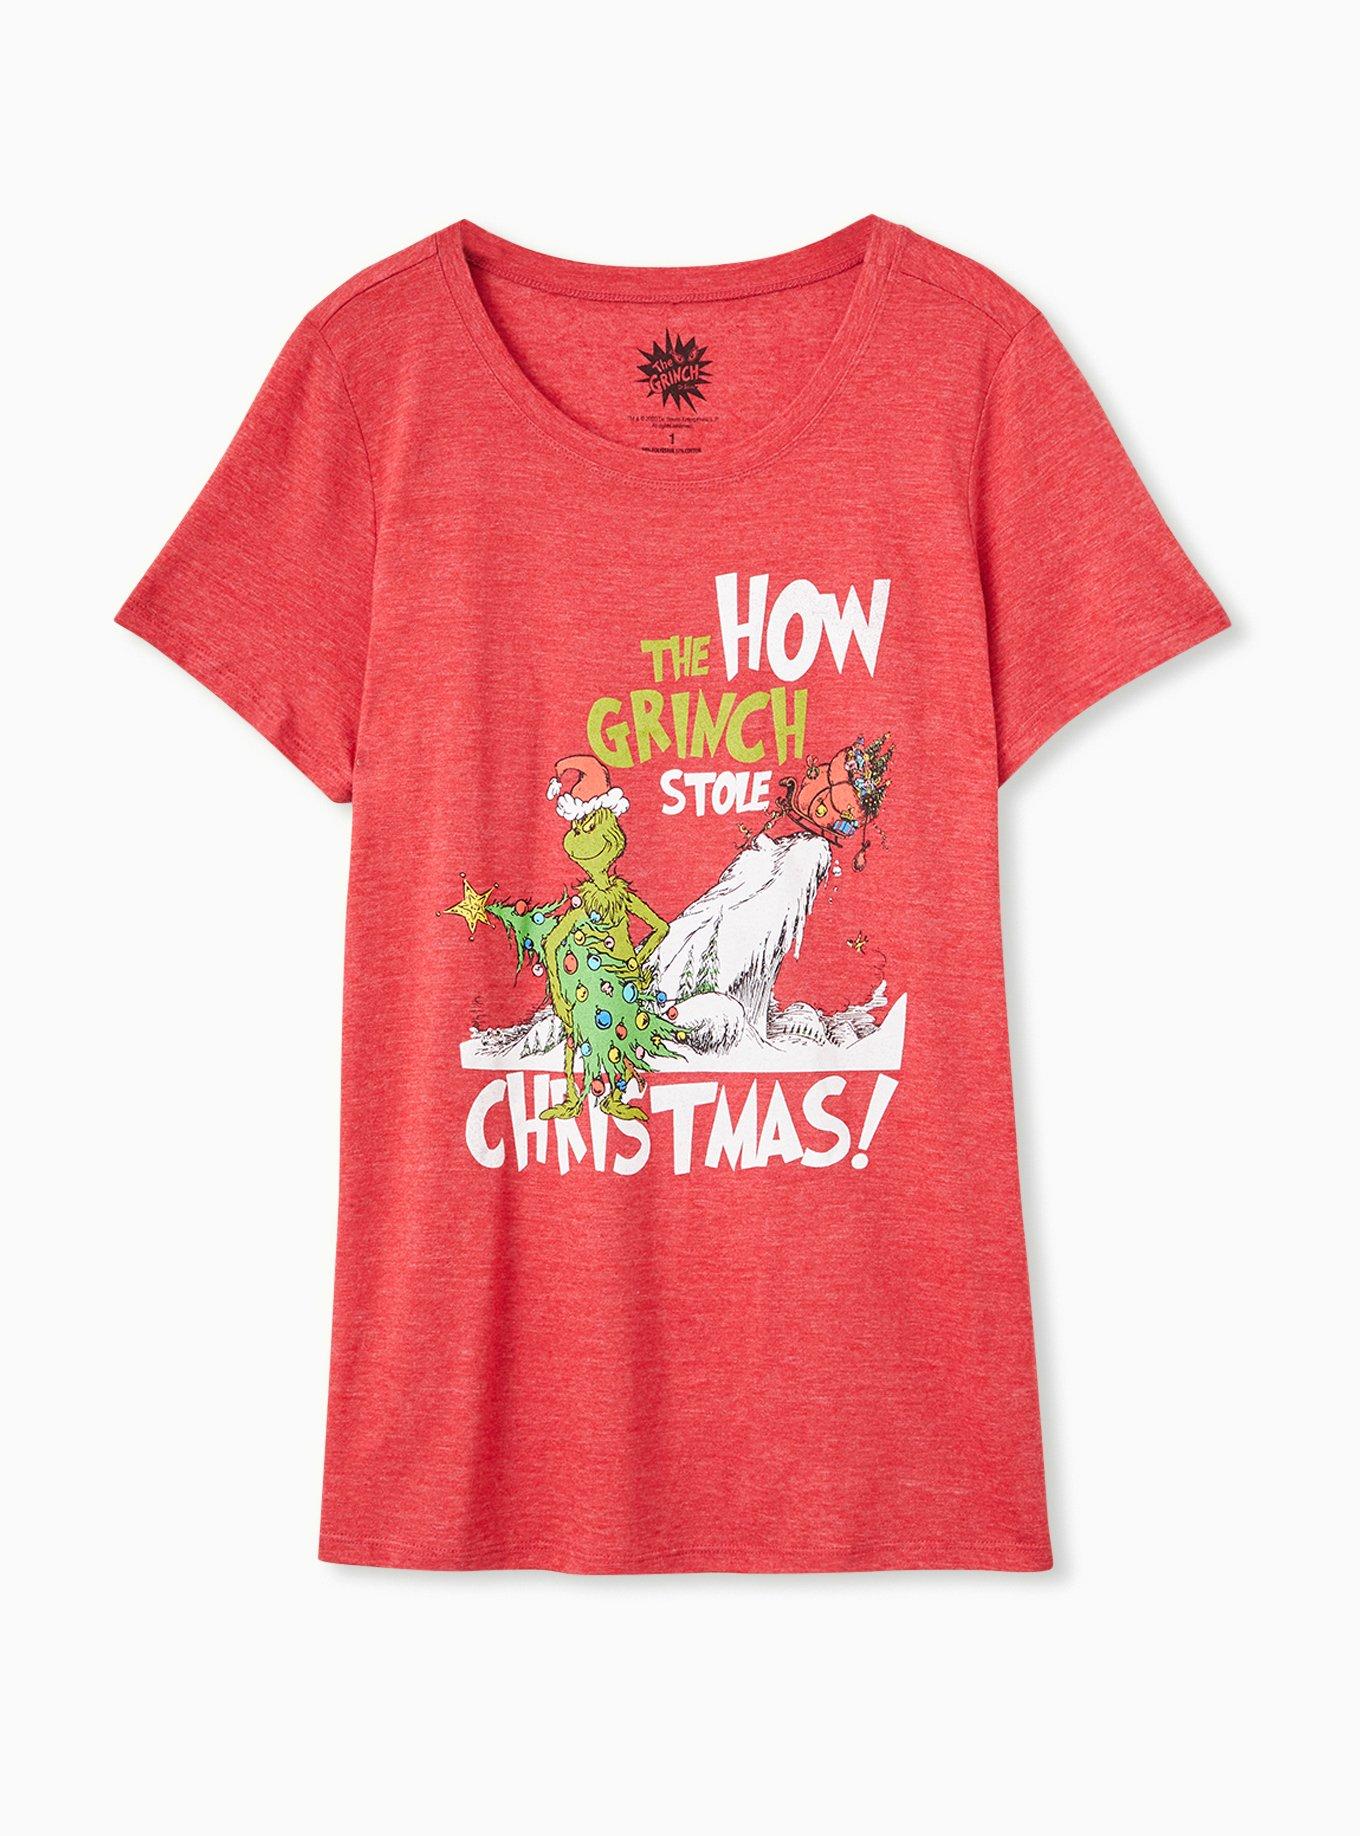 Plus Size - How The Grinch Stole Christmas Slim Fit Crew Tee - Red - Torrid